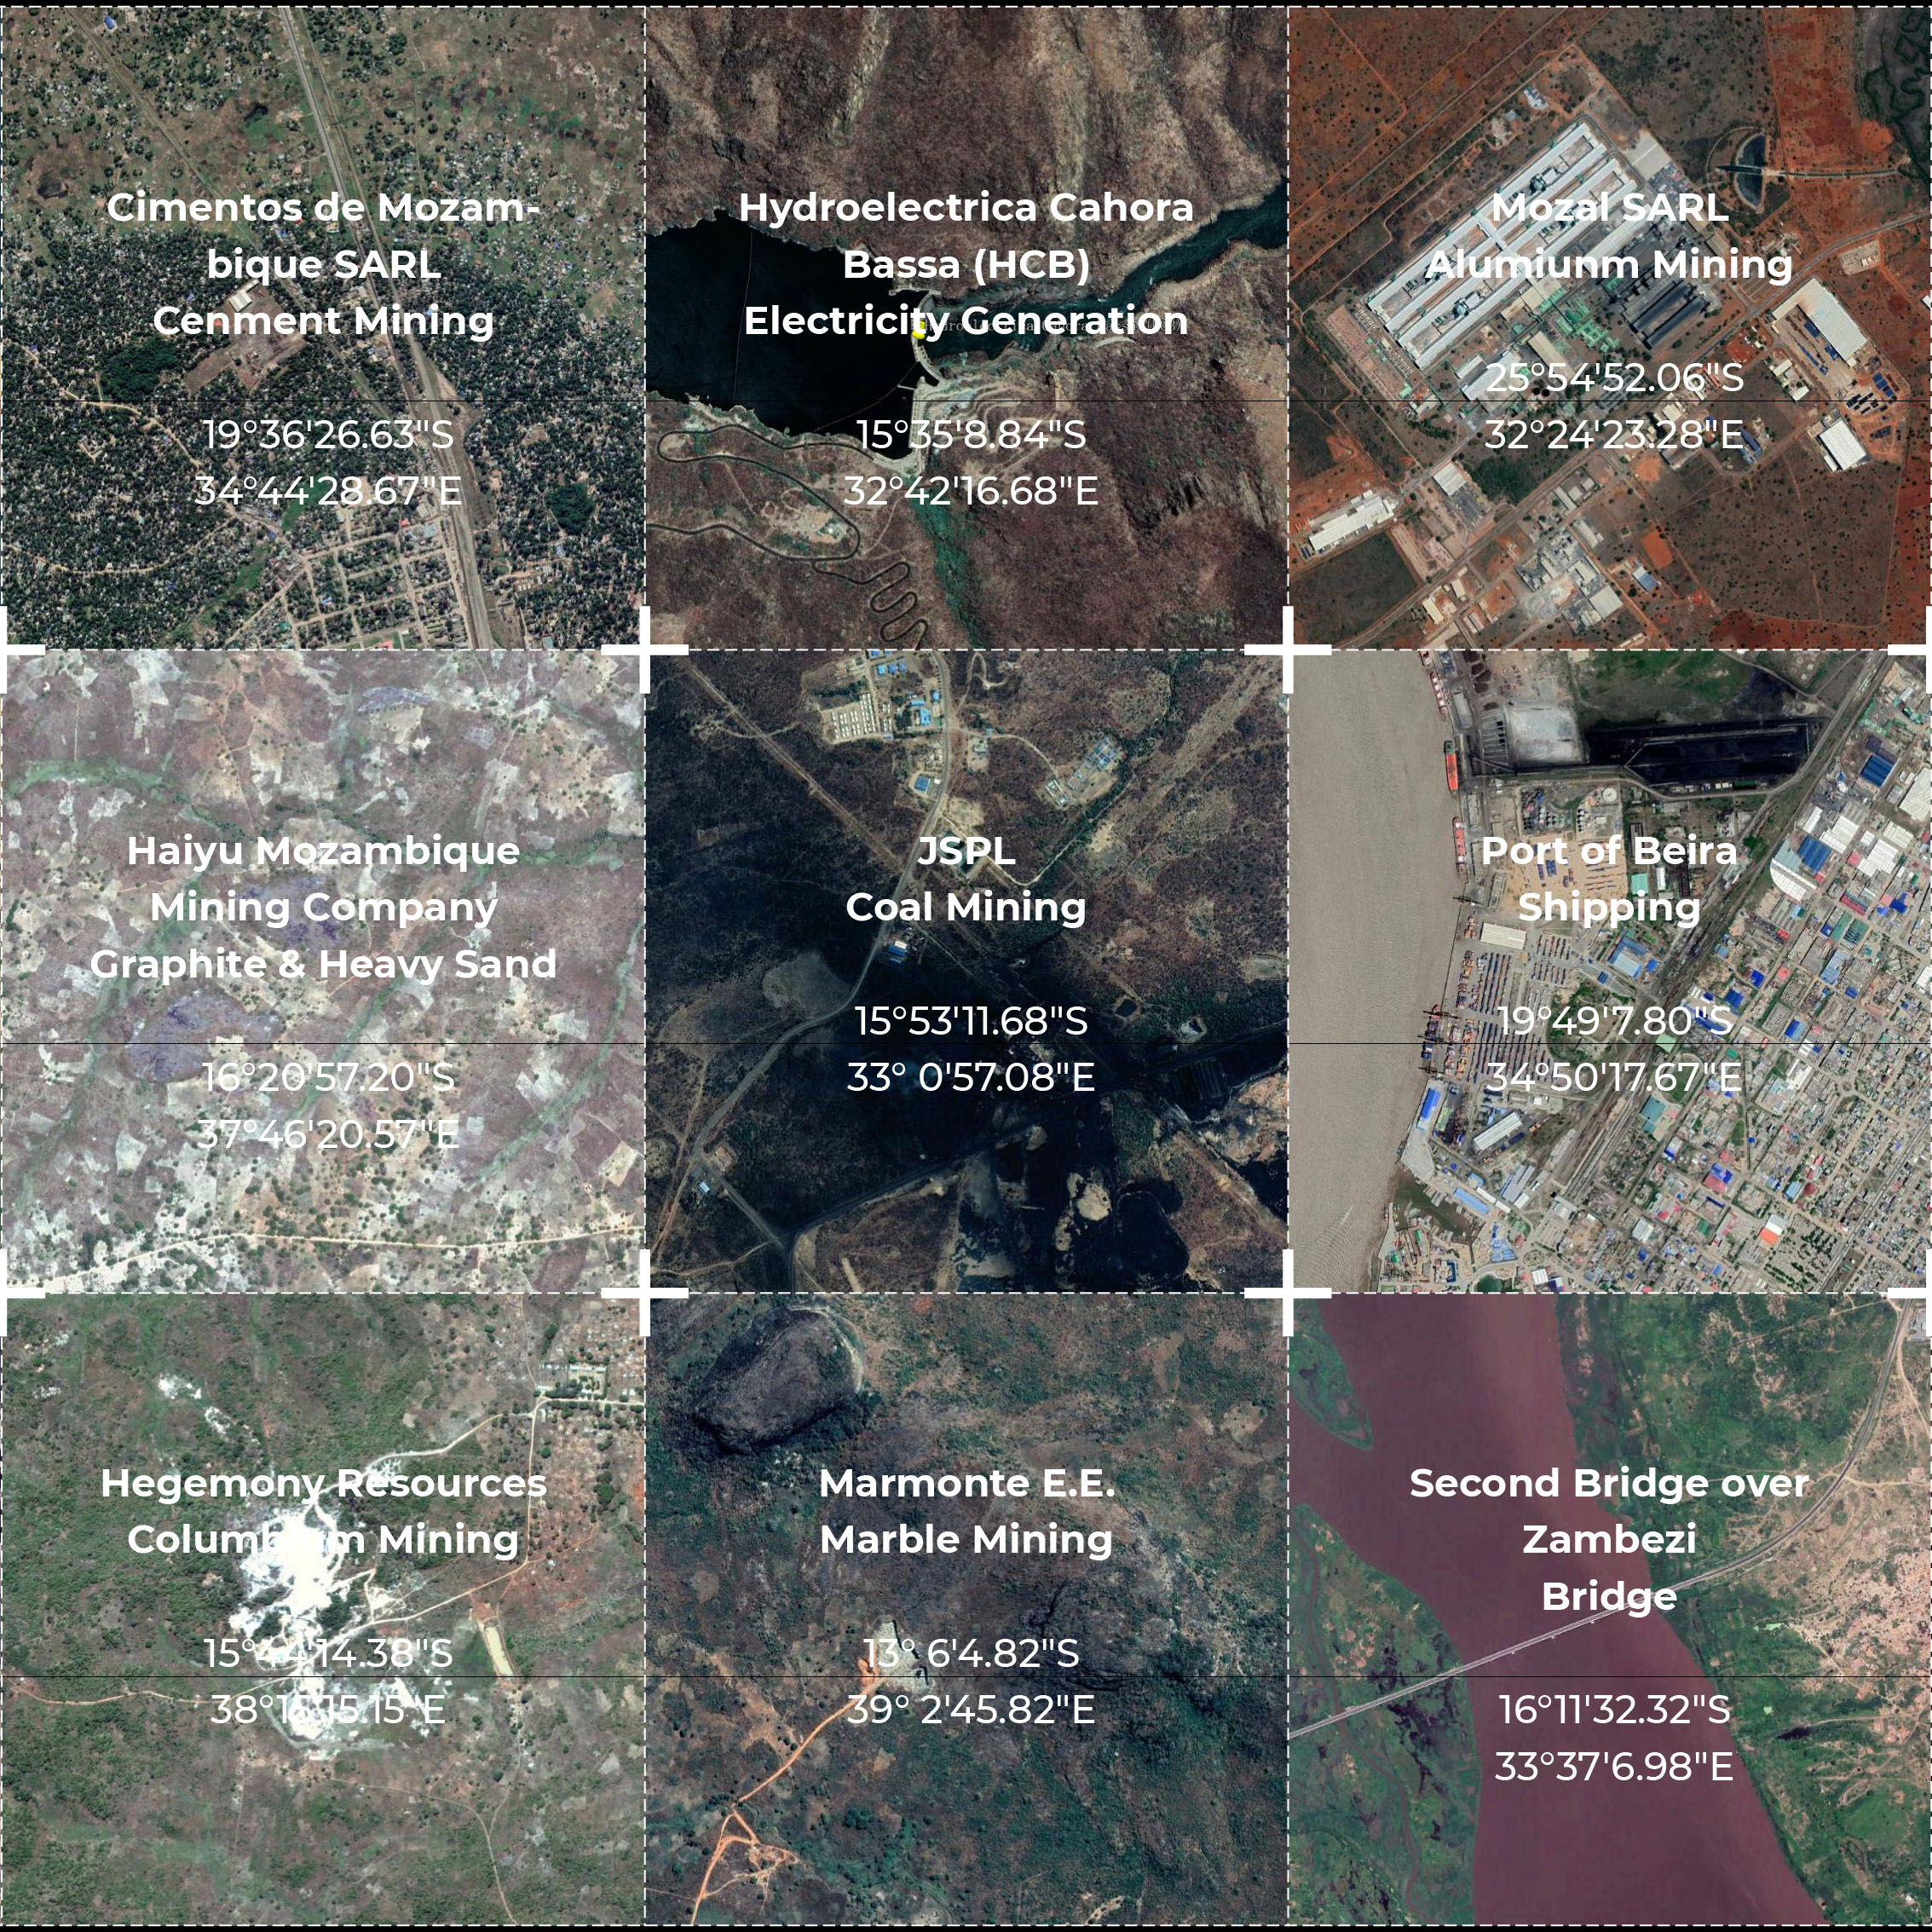 Extractive Urbanism: Social and Territorial Fragmentation in Mozambibque's Energy Extraction Landscape